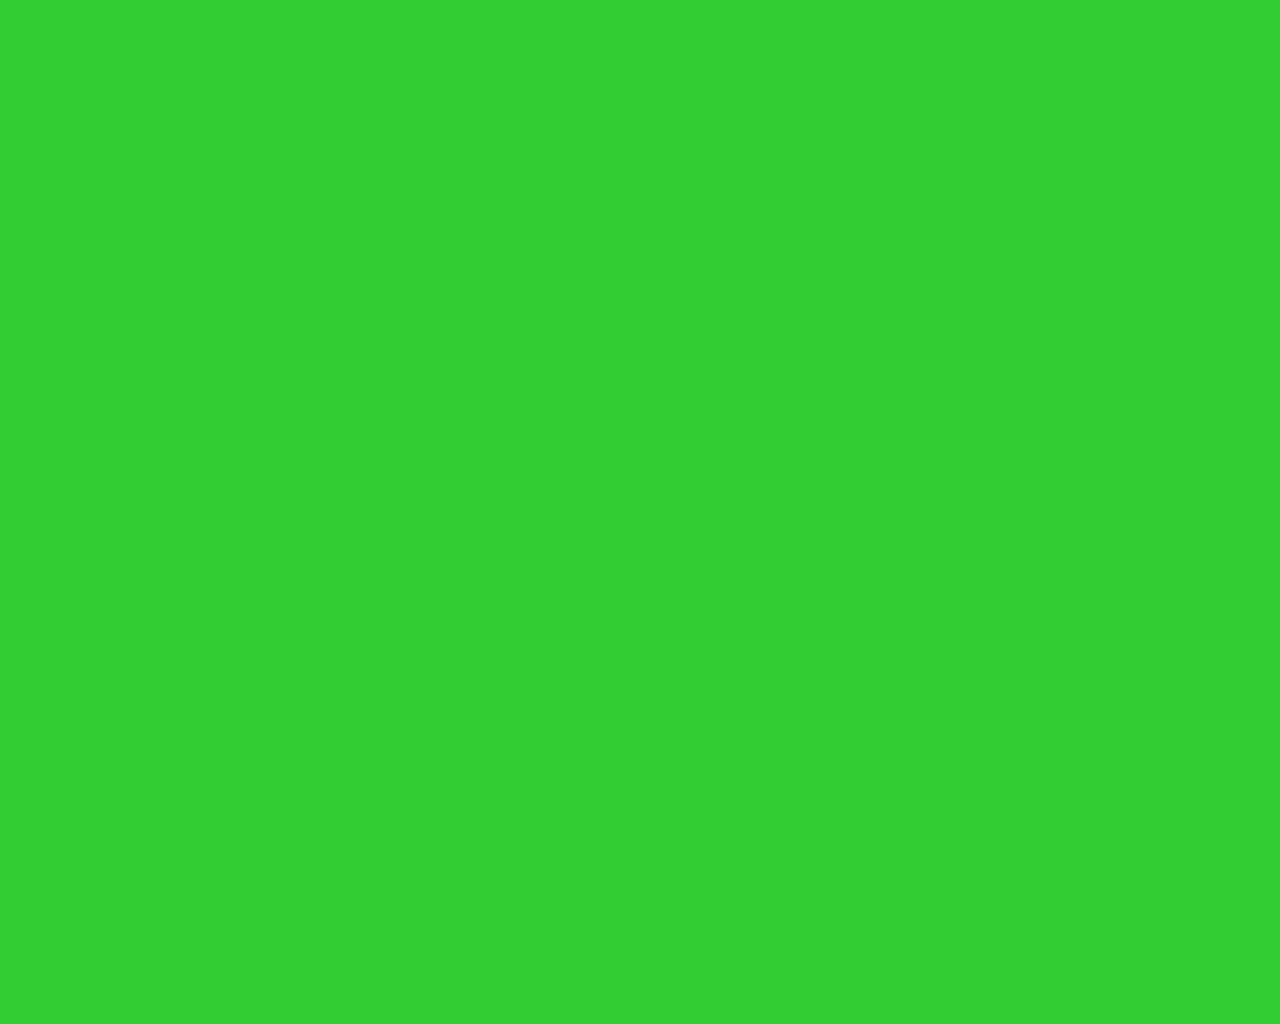 Lime Green Background Images Pictures   Becuo